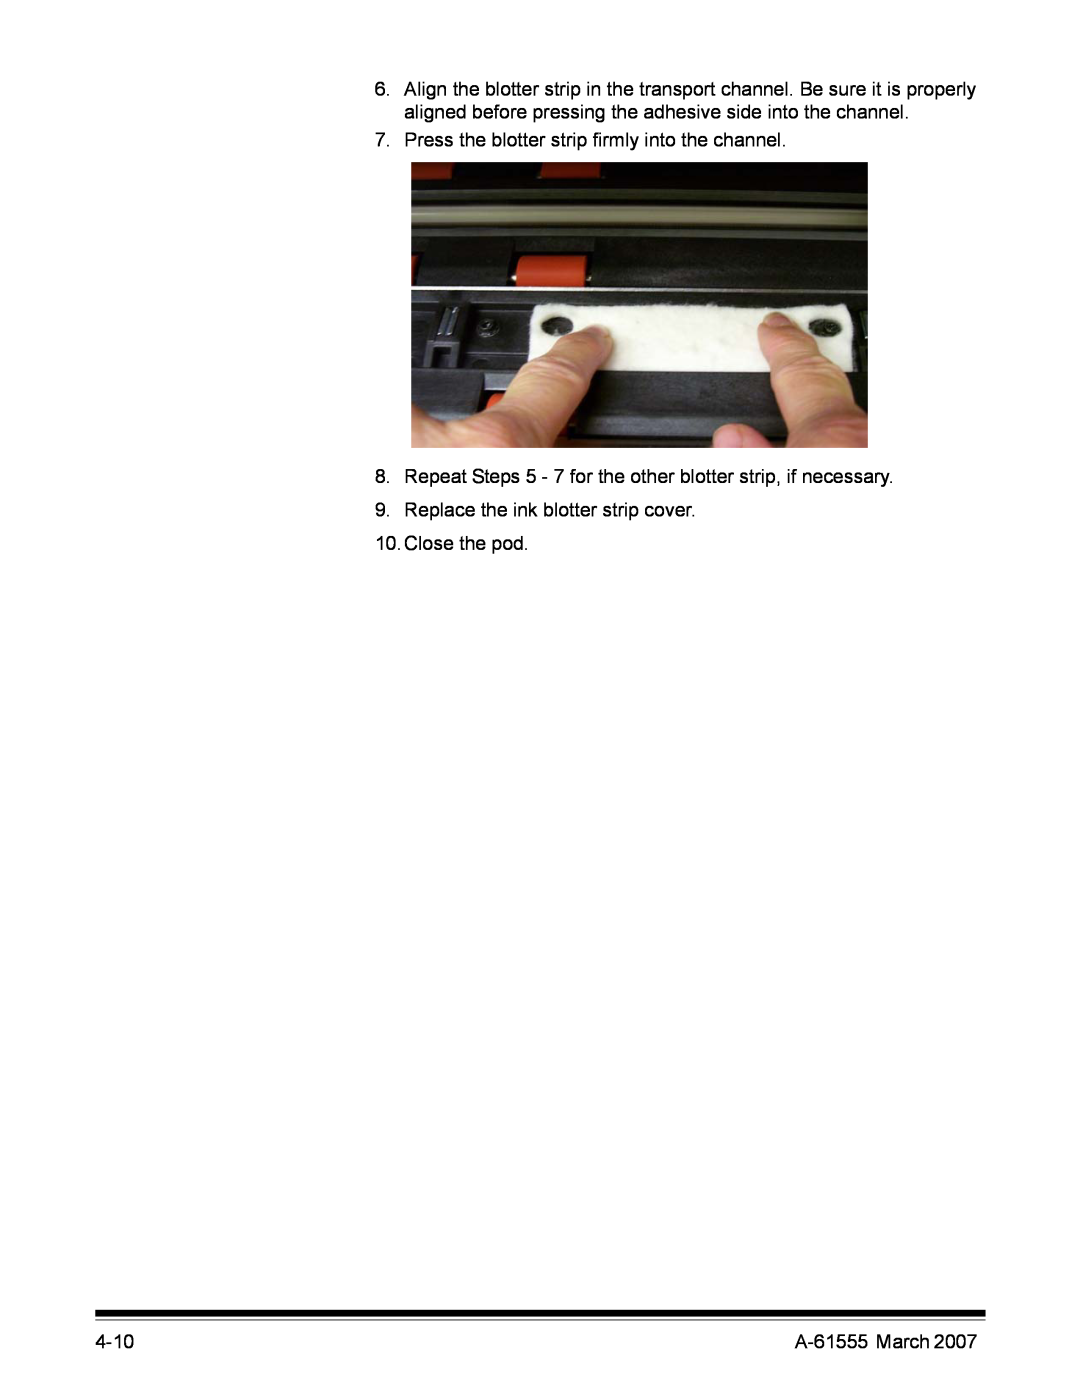 Kodak i1800 Series Press the blotter strip firmly into the channel, Replace the ink blotter strip cover, Close the pod 